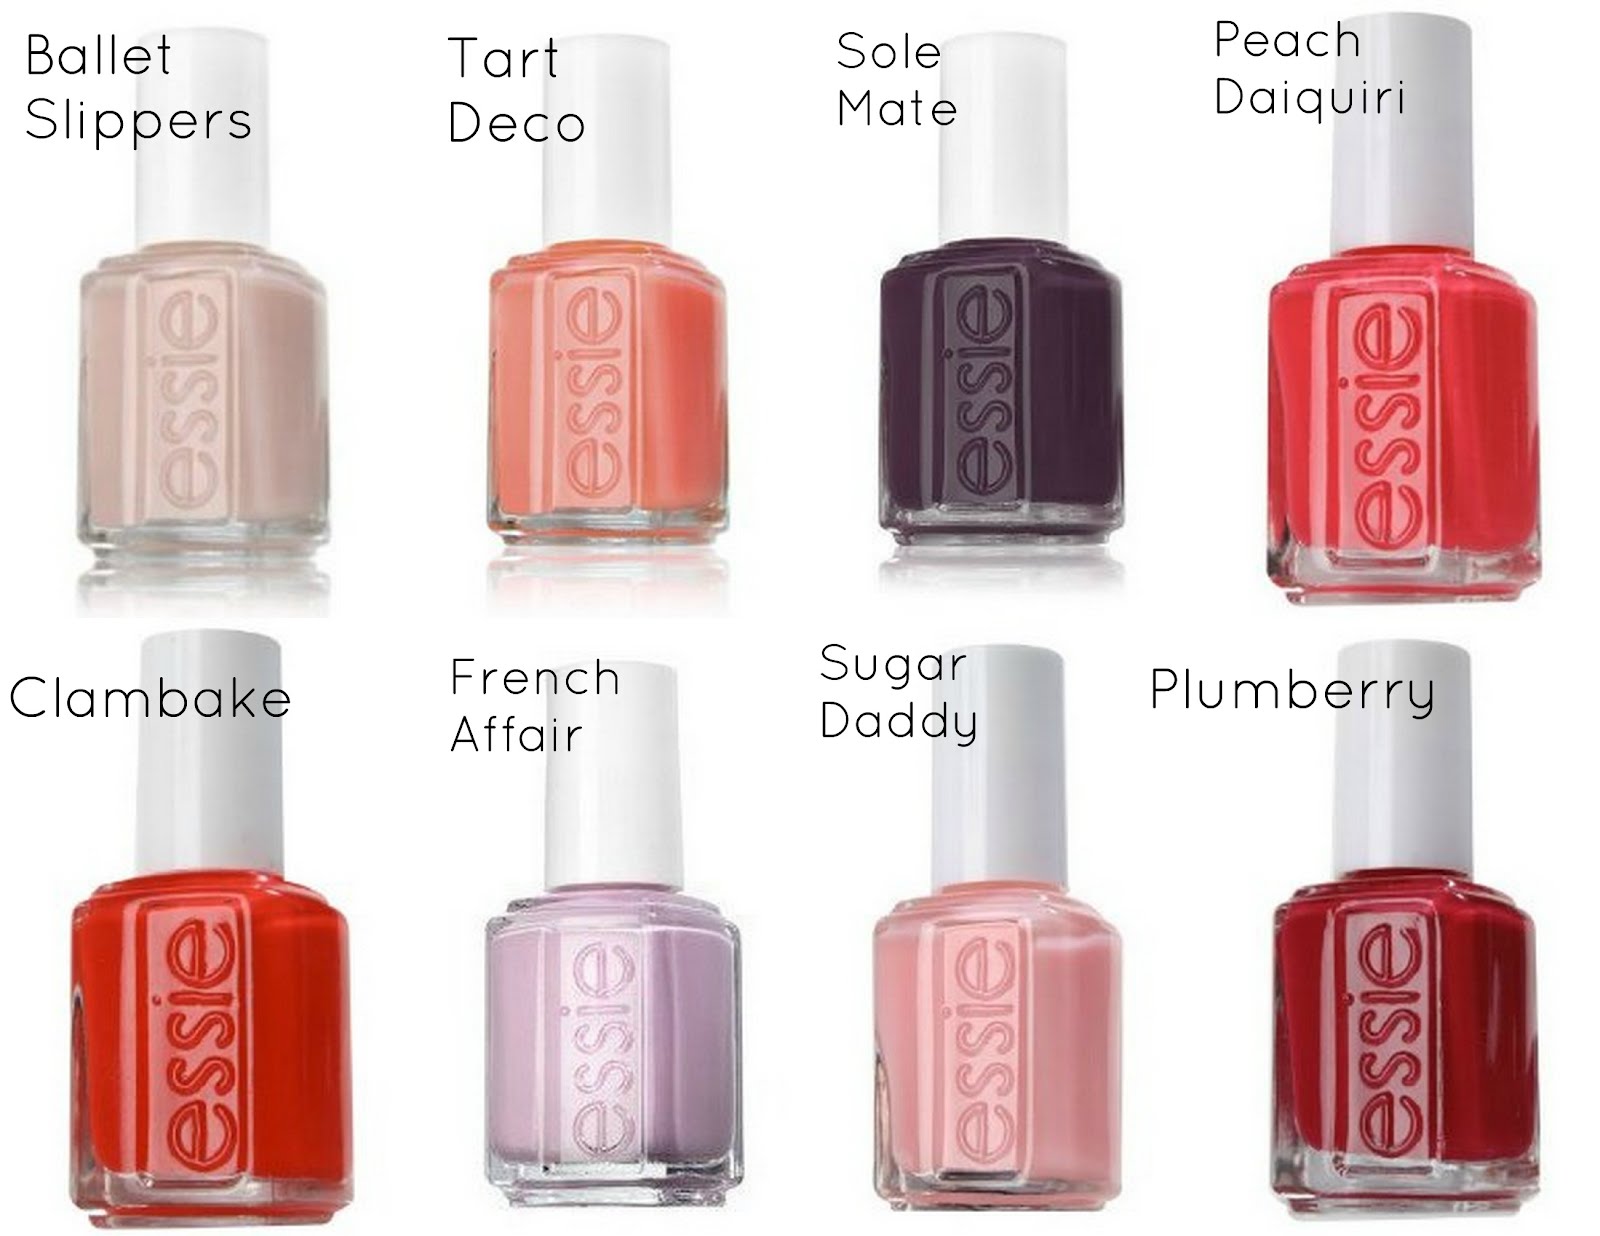 Top Essie Nail Colors - wide 9